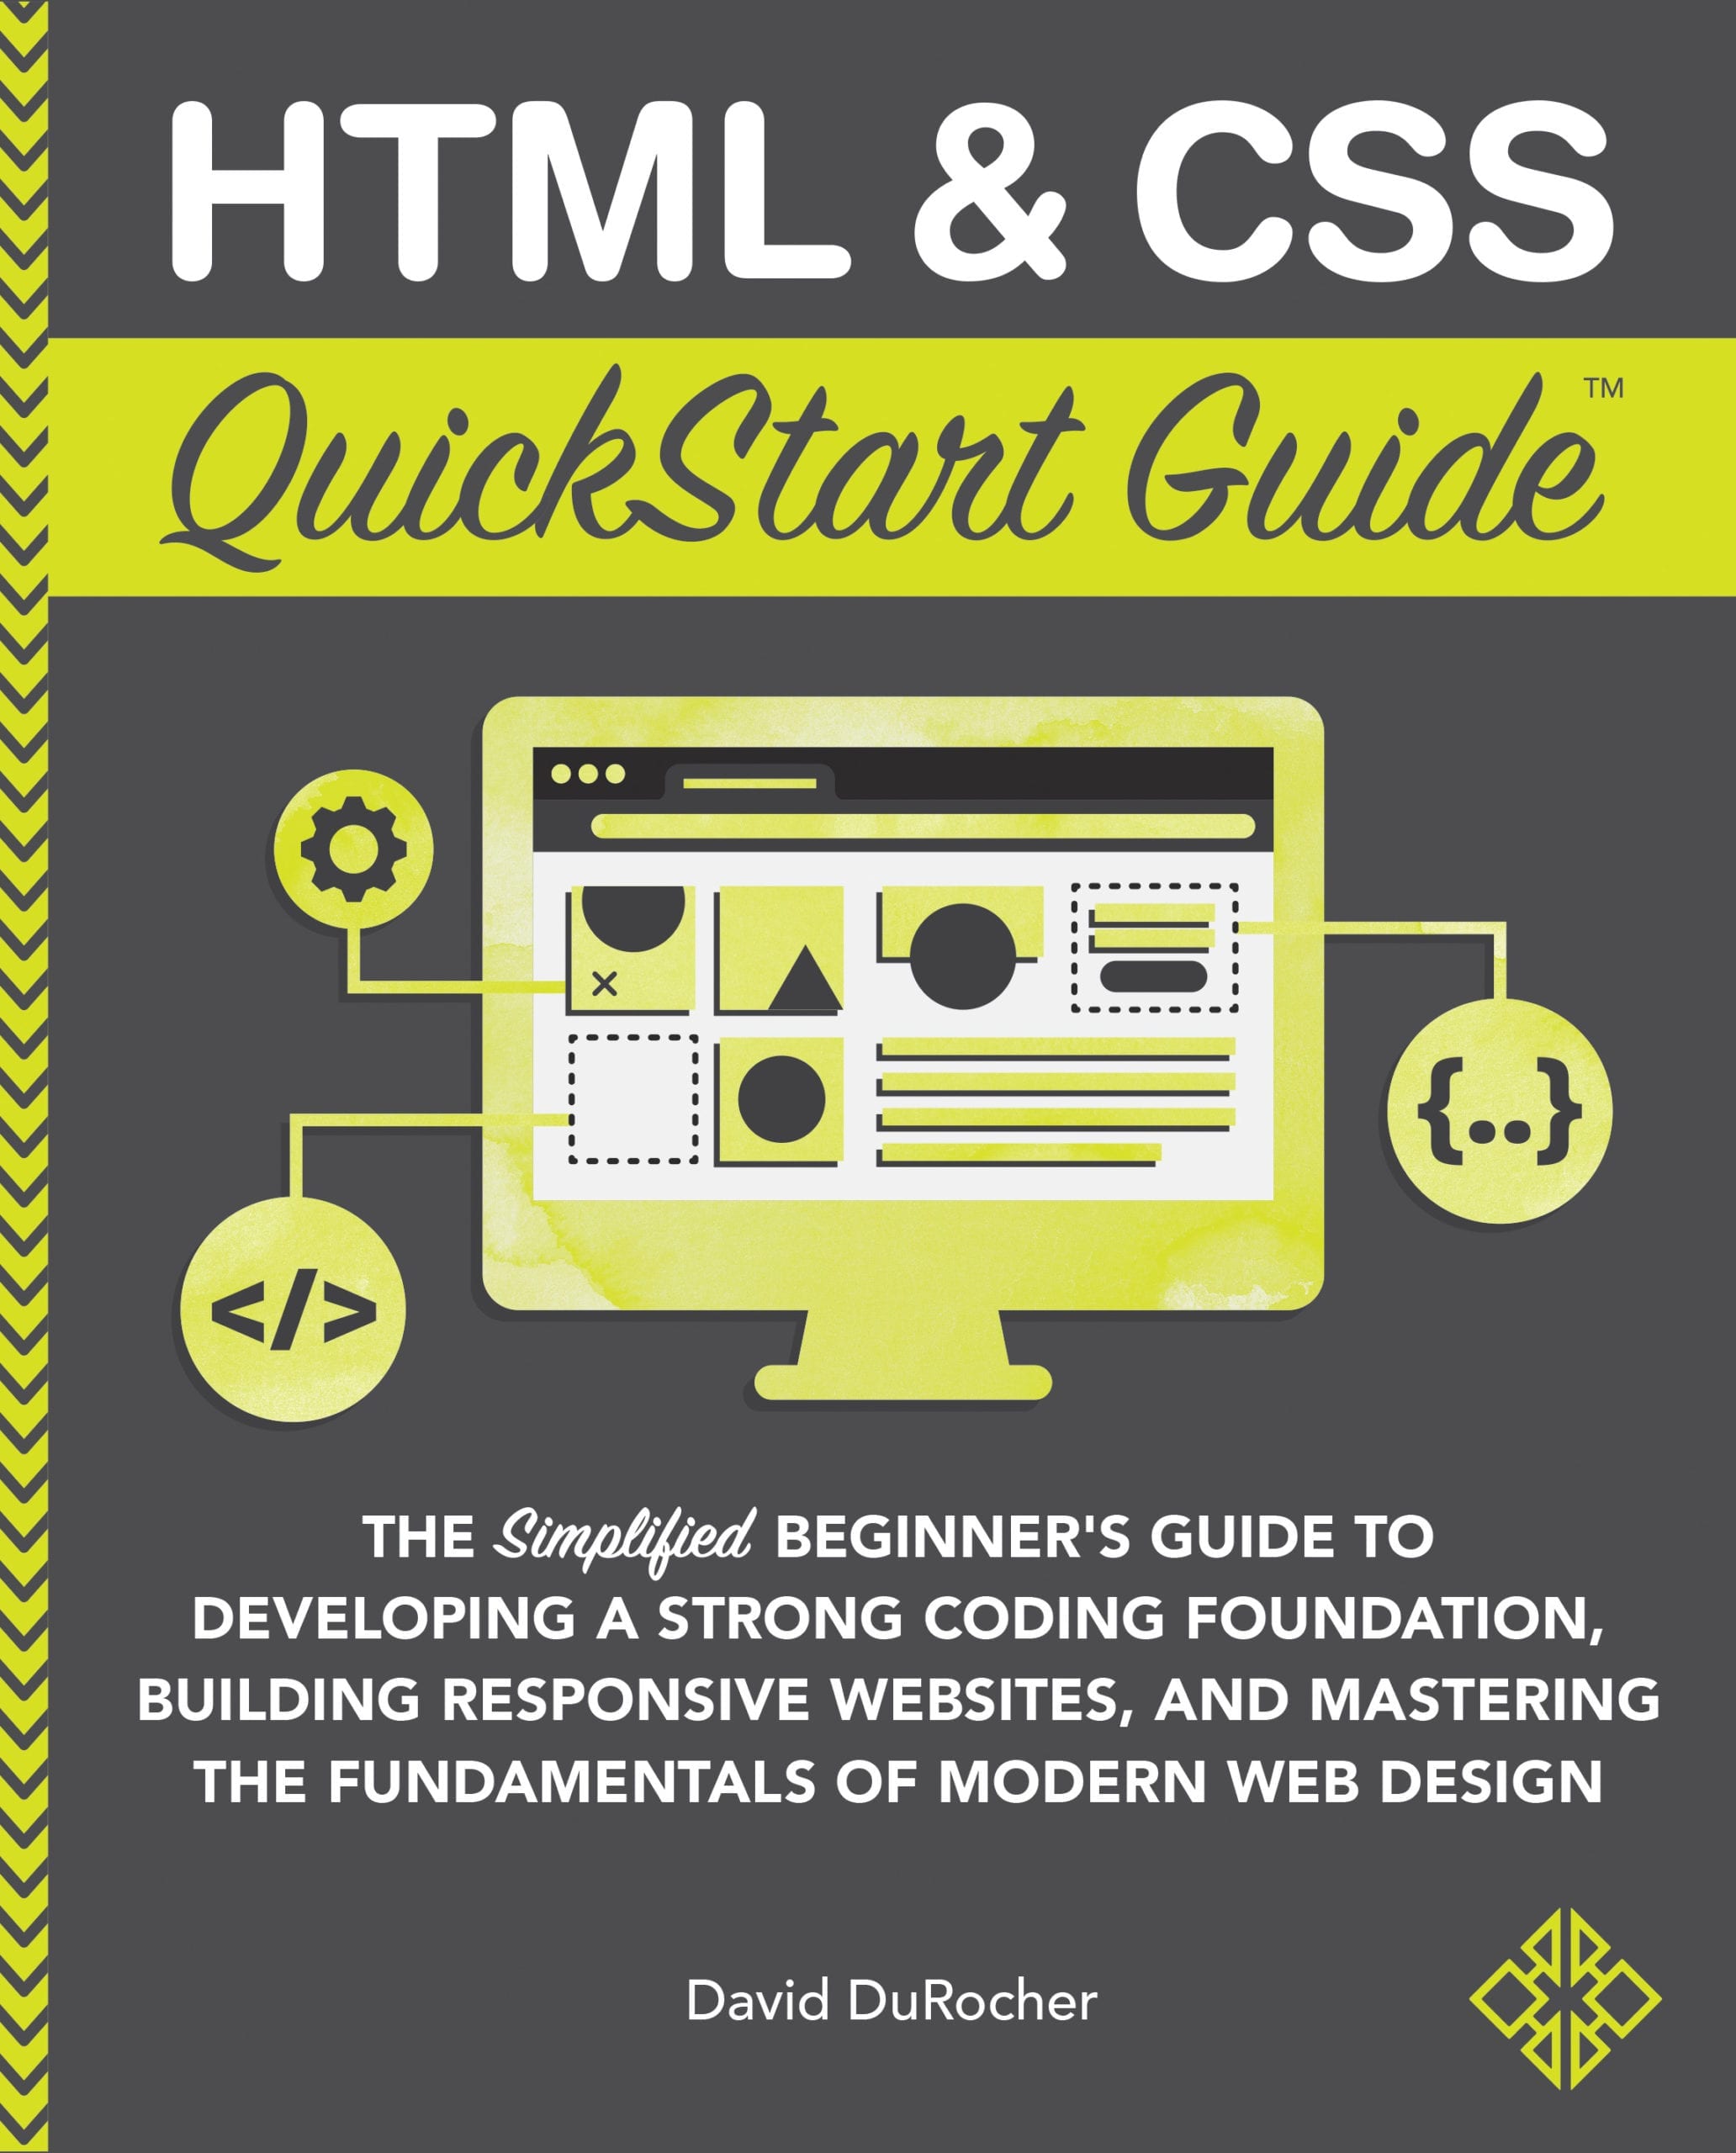 HTML & CSS Cover